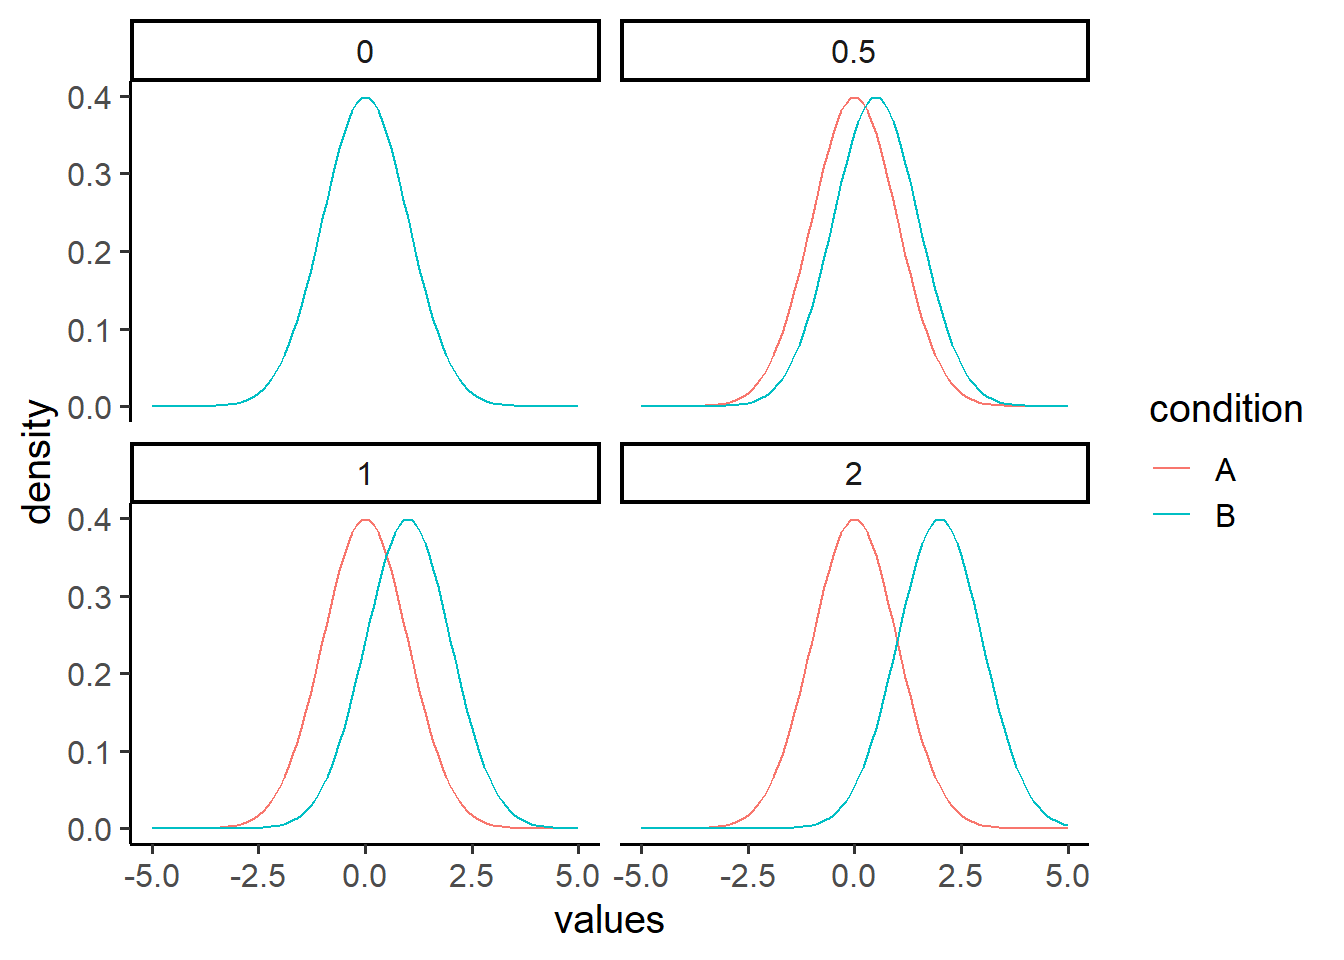 Each panel shows hypothetical distributions for two conditions. As the effect-size increases, the difference between the distributions become larger